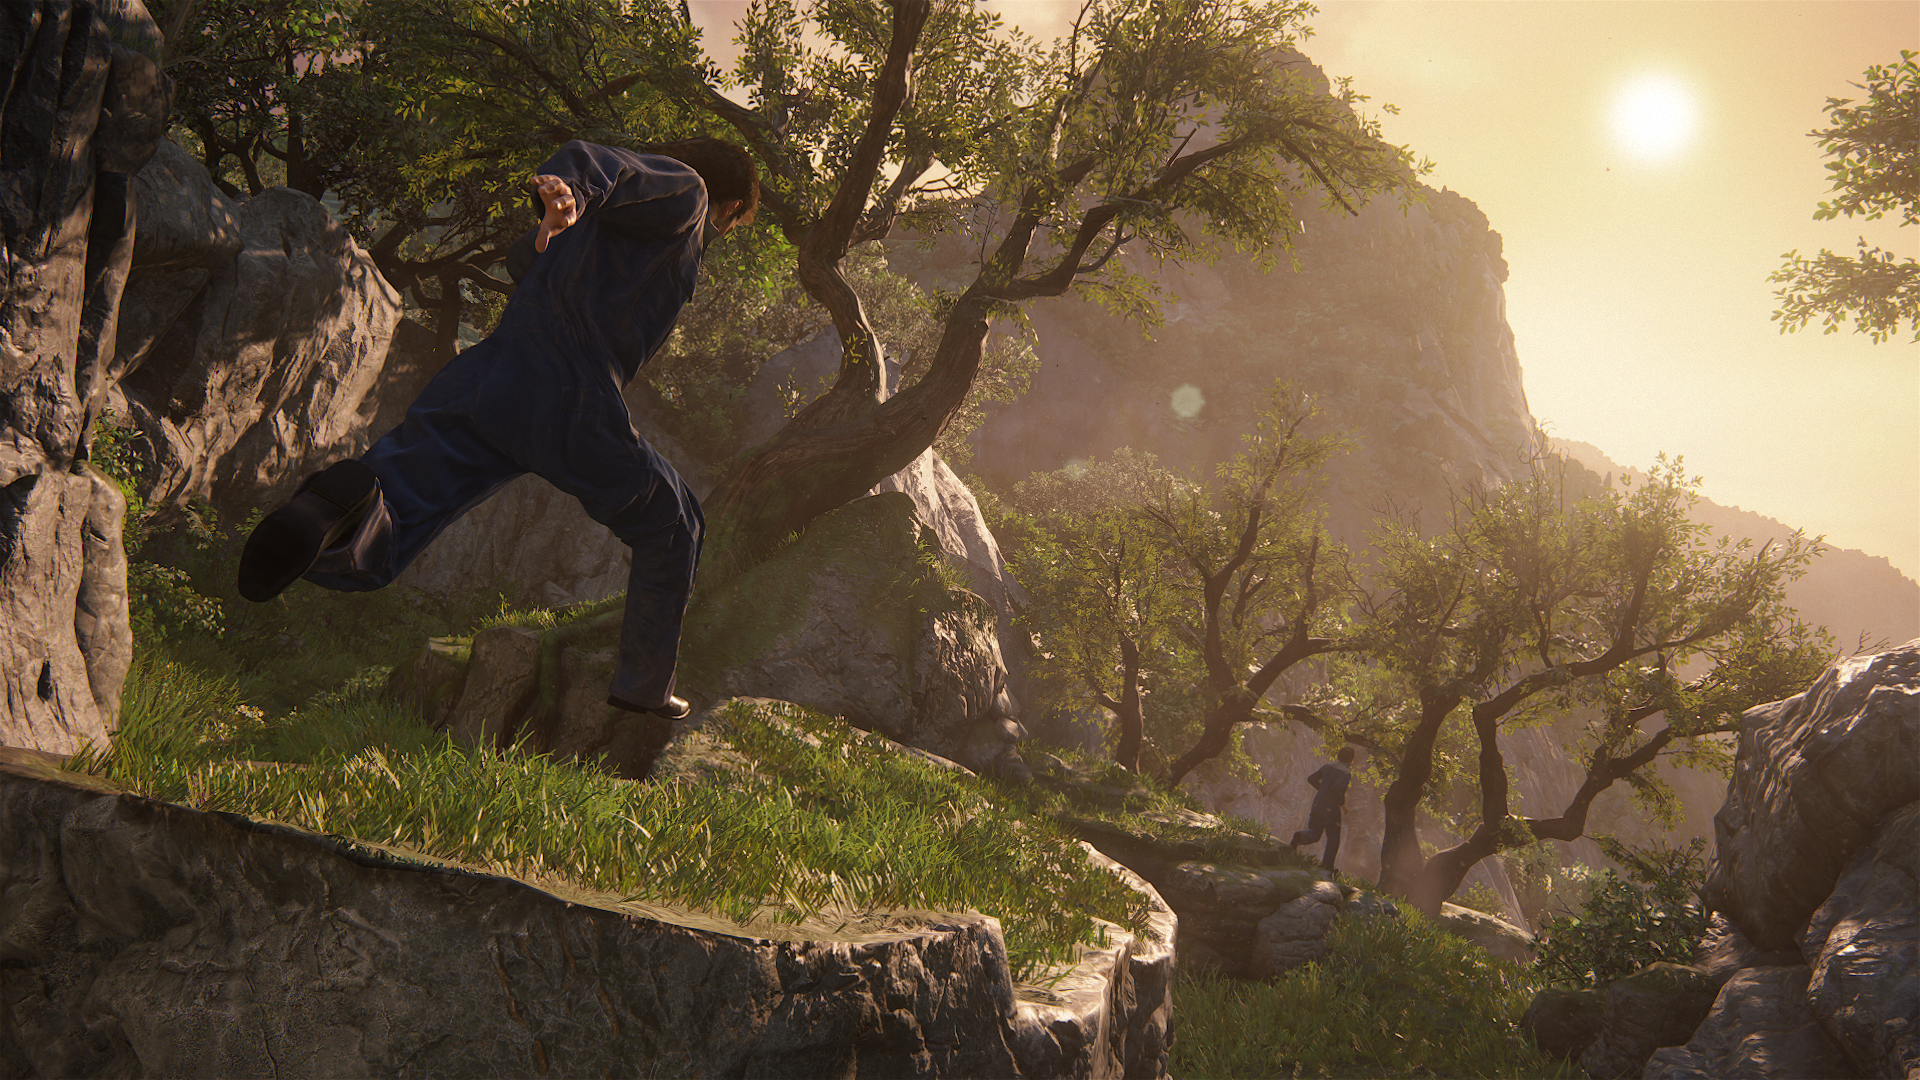 uncharted_4_3_by_gamephotography-daujqzw.png